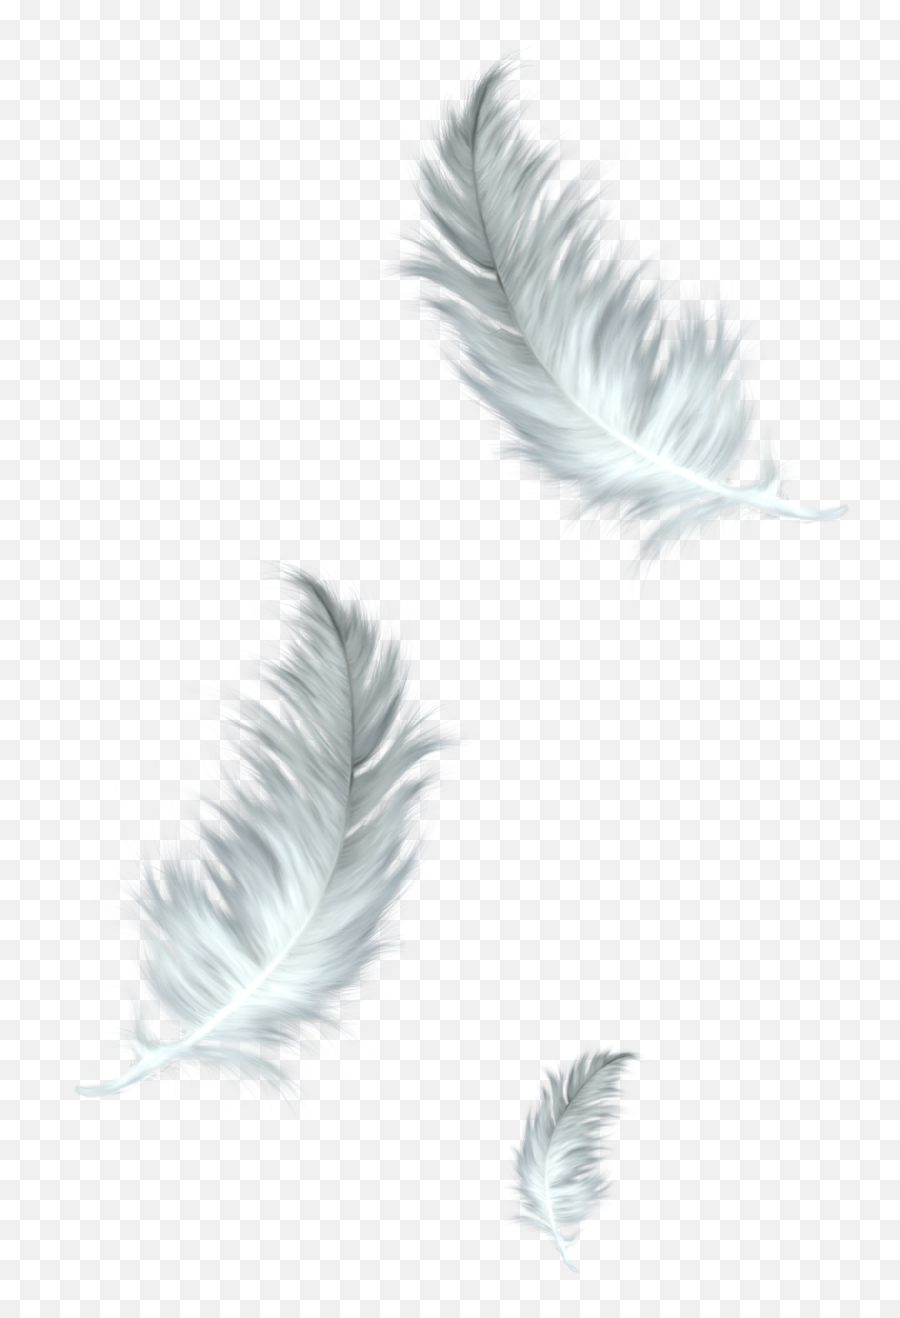 The Floating Feather Bird Clip Art - Feathers Png Download Transparent Background Feather Clipart Emoji,Feather Clipart Black And White